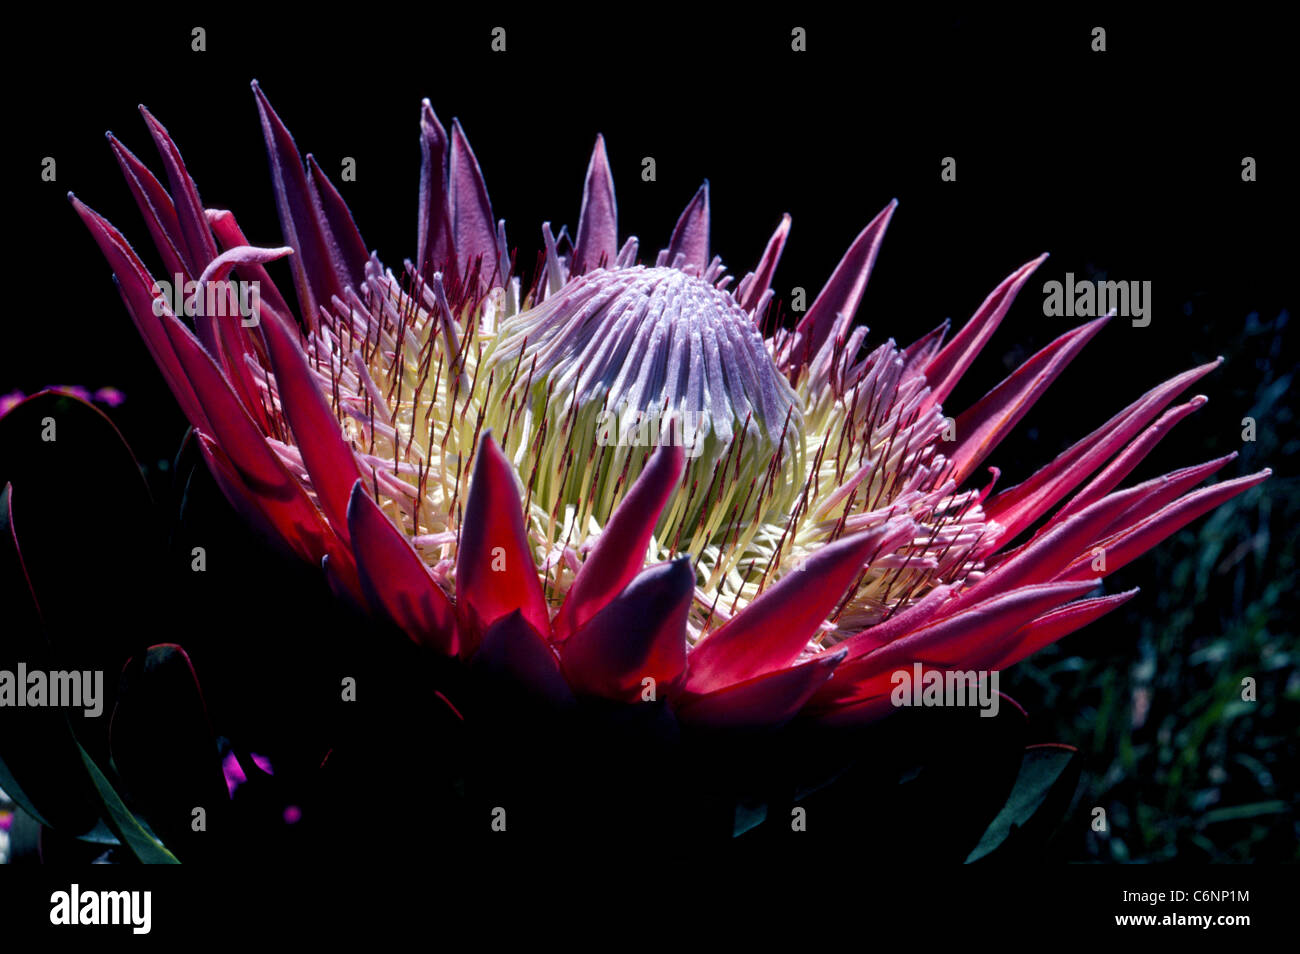 The beautiful national flower of South Africa is the King Protea, a flowering plant that is also known as Giant Protea, King Sugar Bush, and Honeypot. Stock Photo